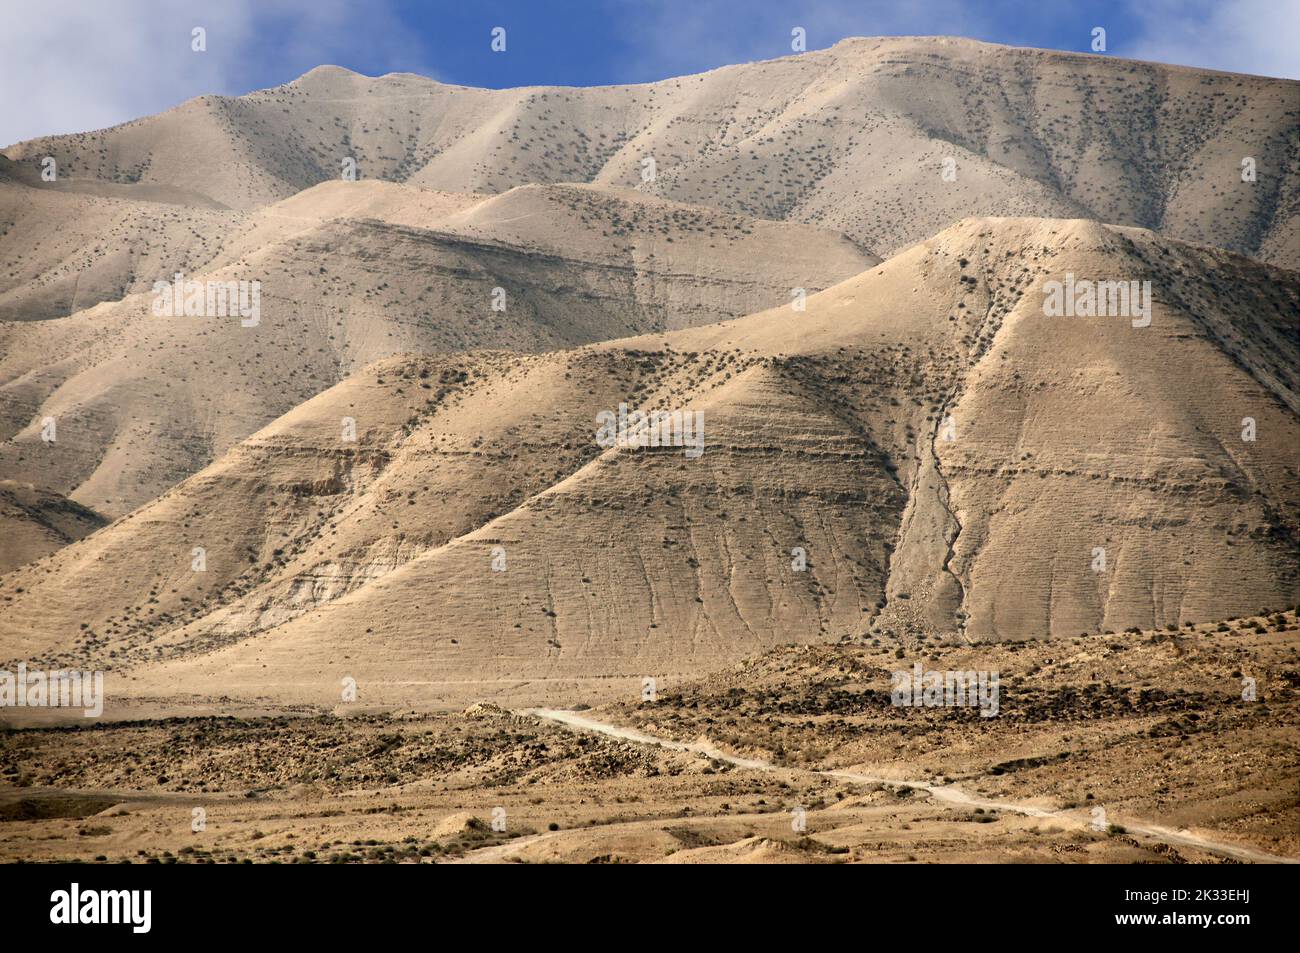 Views of the Judaean Desert Mountains near the Dead Sea of Israel Stock Photo